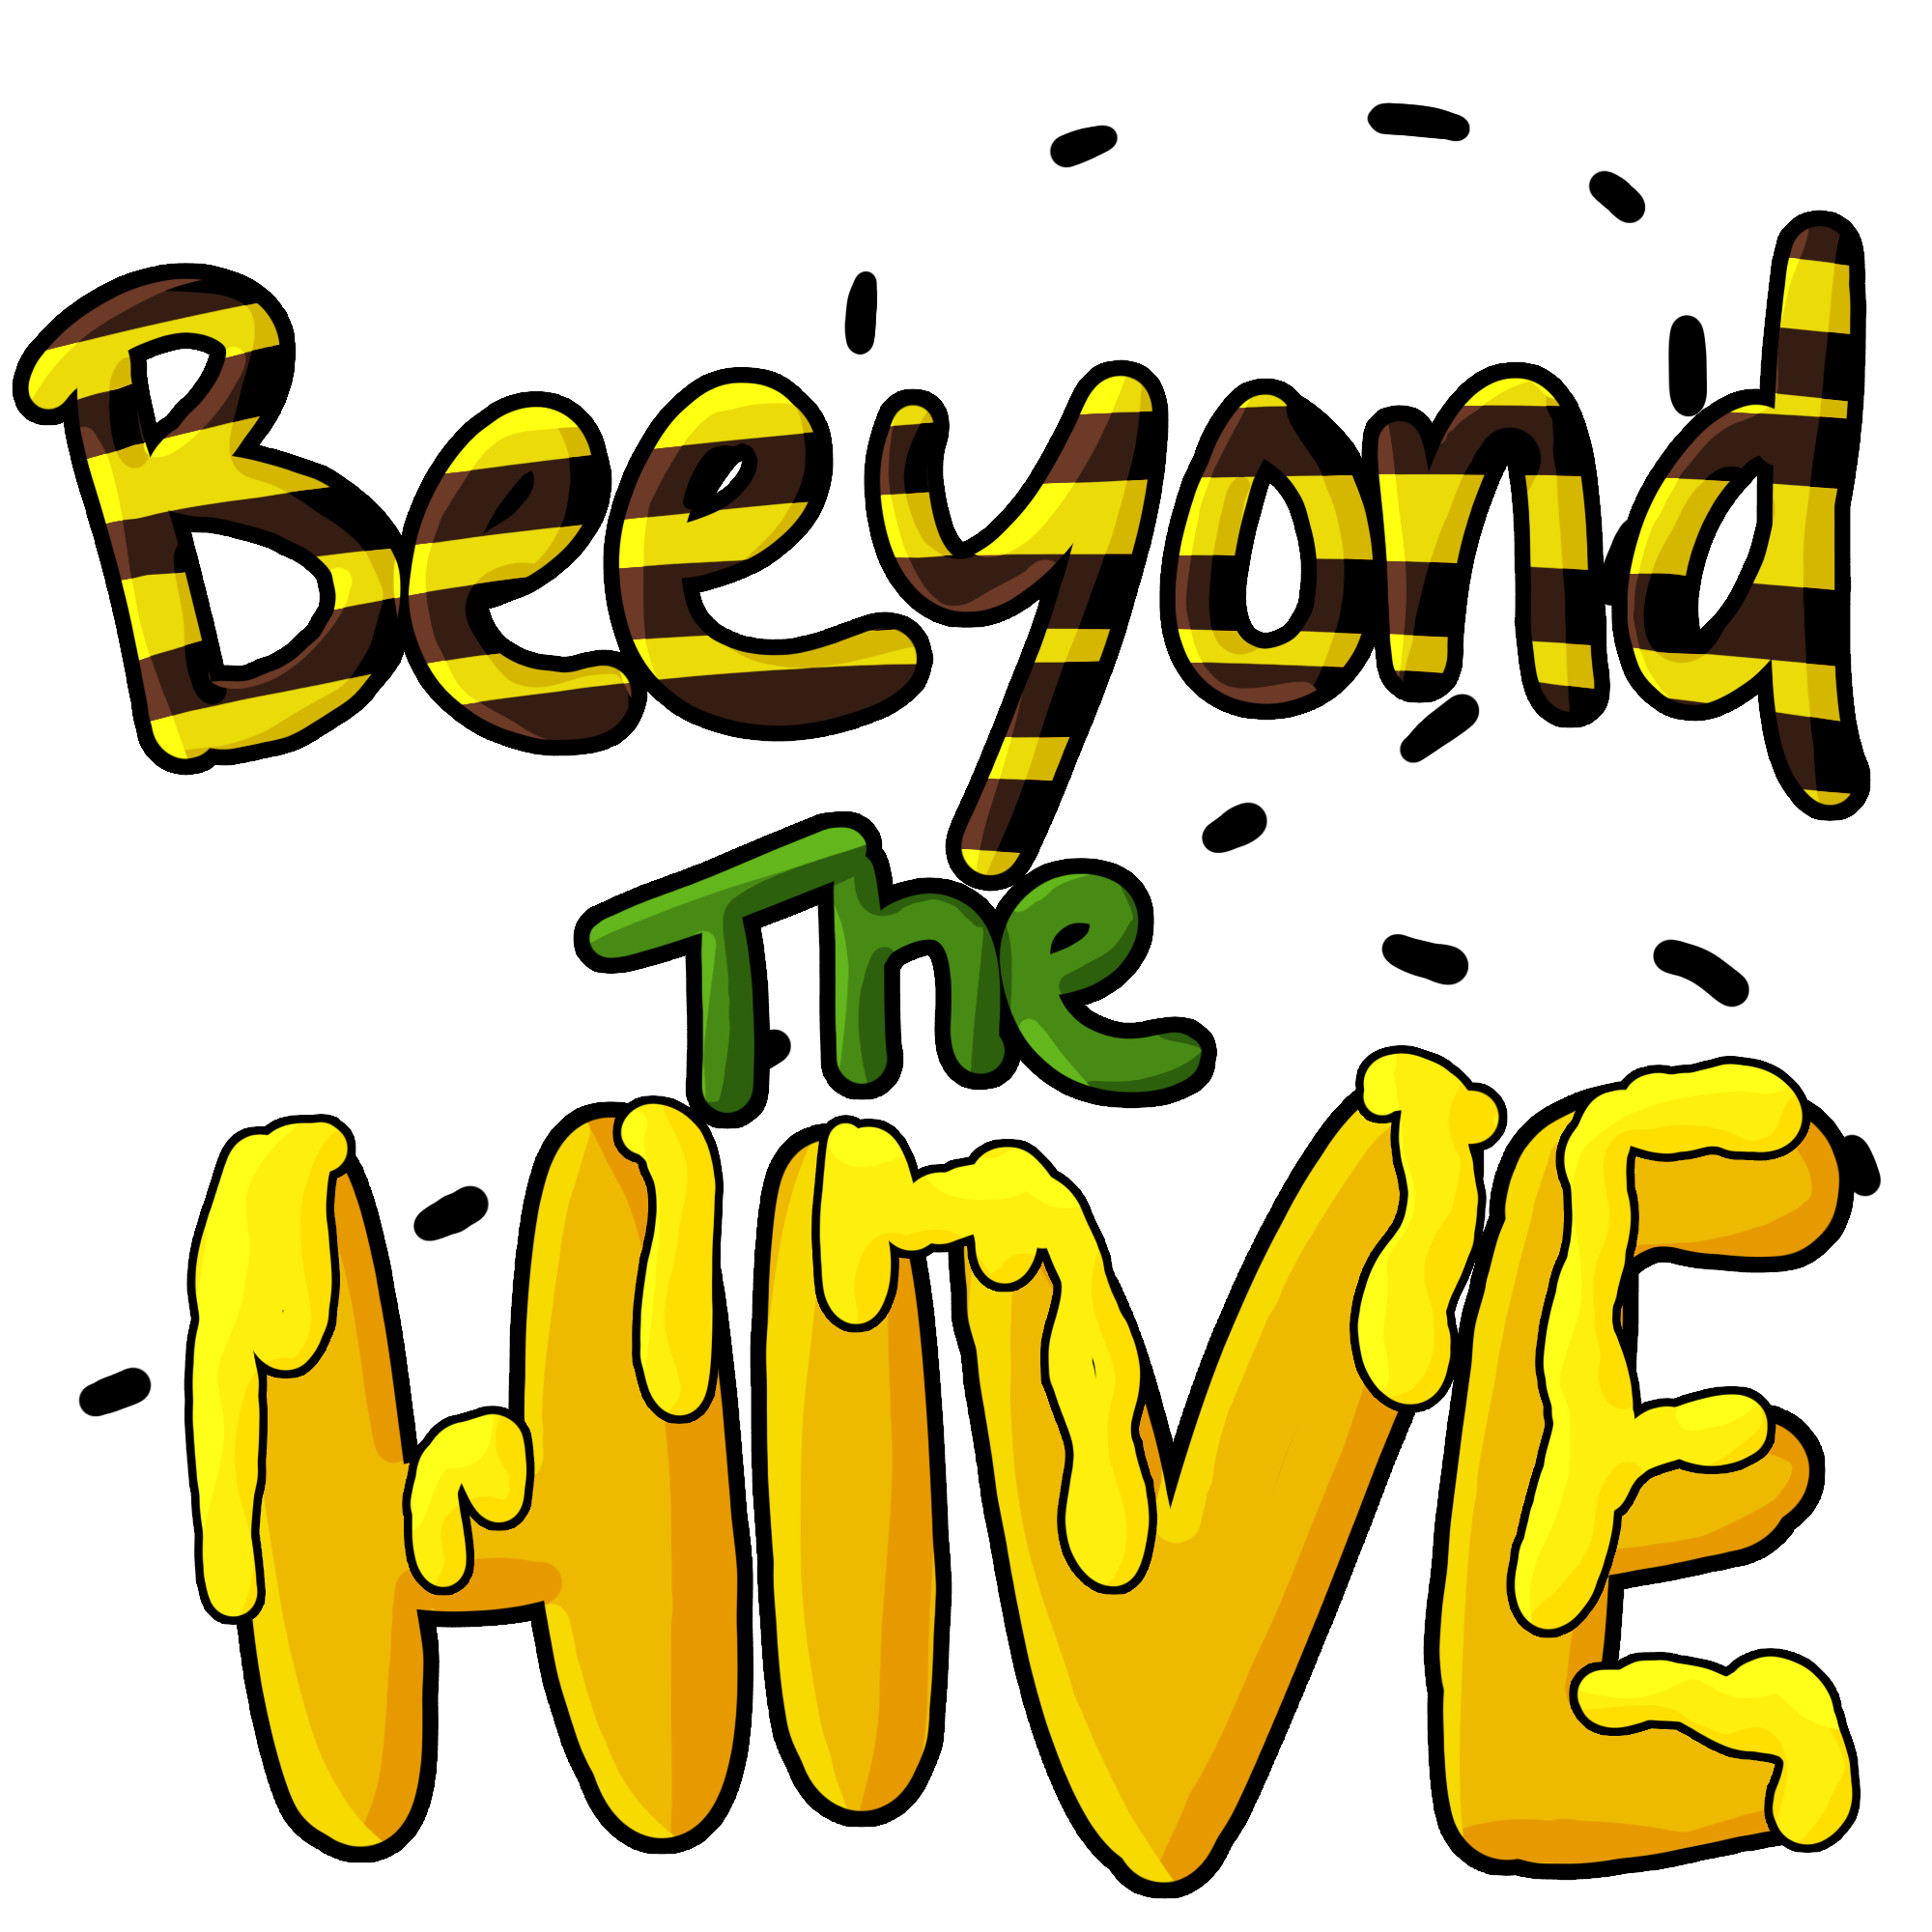 Gardens: Beeyond the Hive by UsrnGamesInc